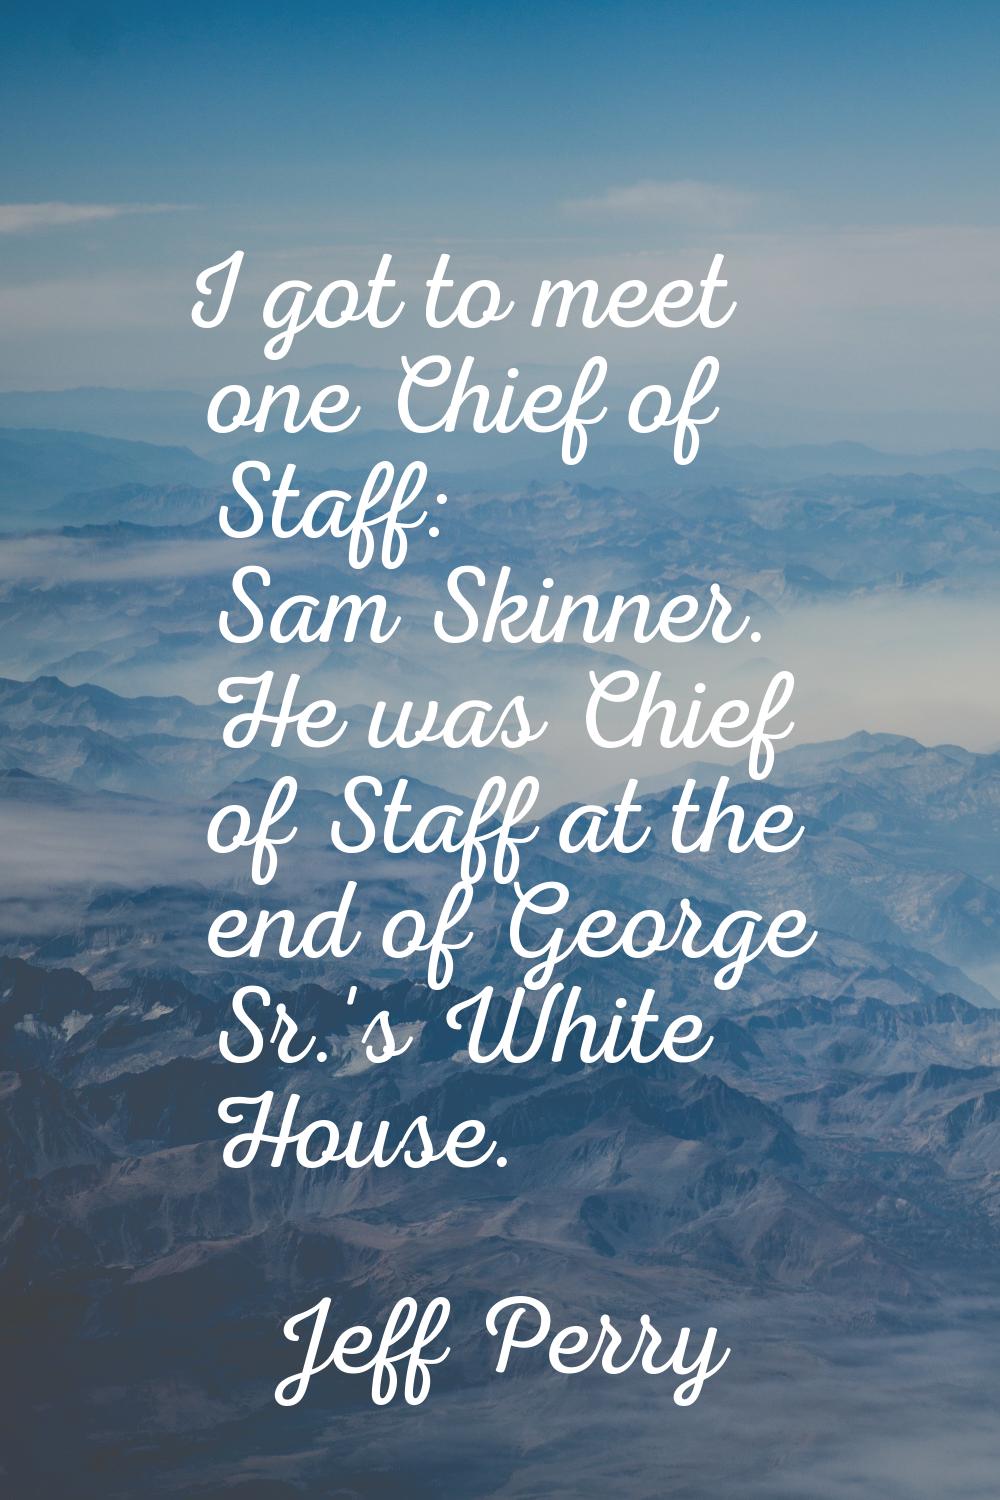 I got to meet one Chief of Staff: Sam Skinner. He was Chief of Staff at the end of George Sr.'s Whi